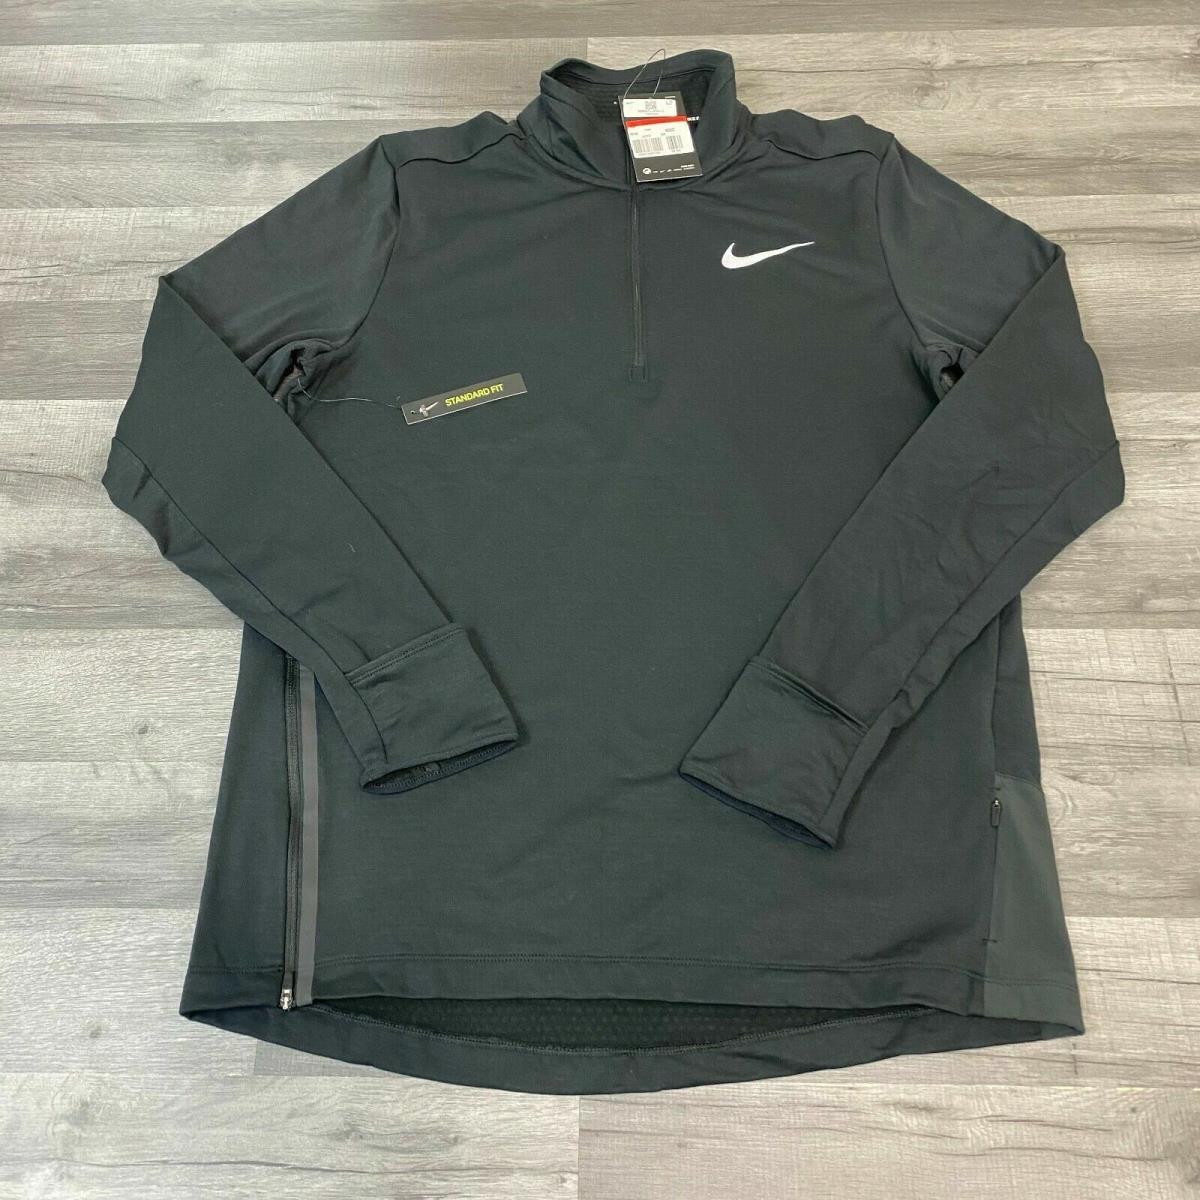 Nike Sphere Element Therma Running Top Size L Jacket Mens Black 928557-010